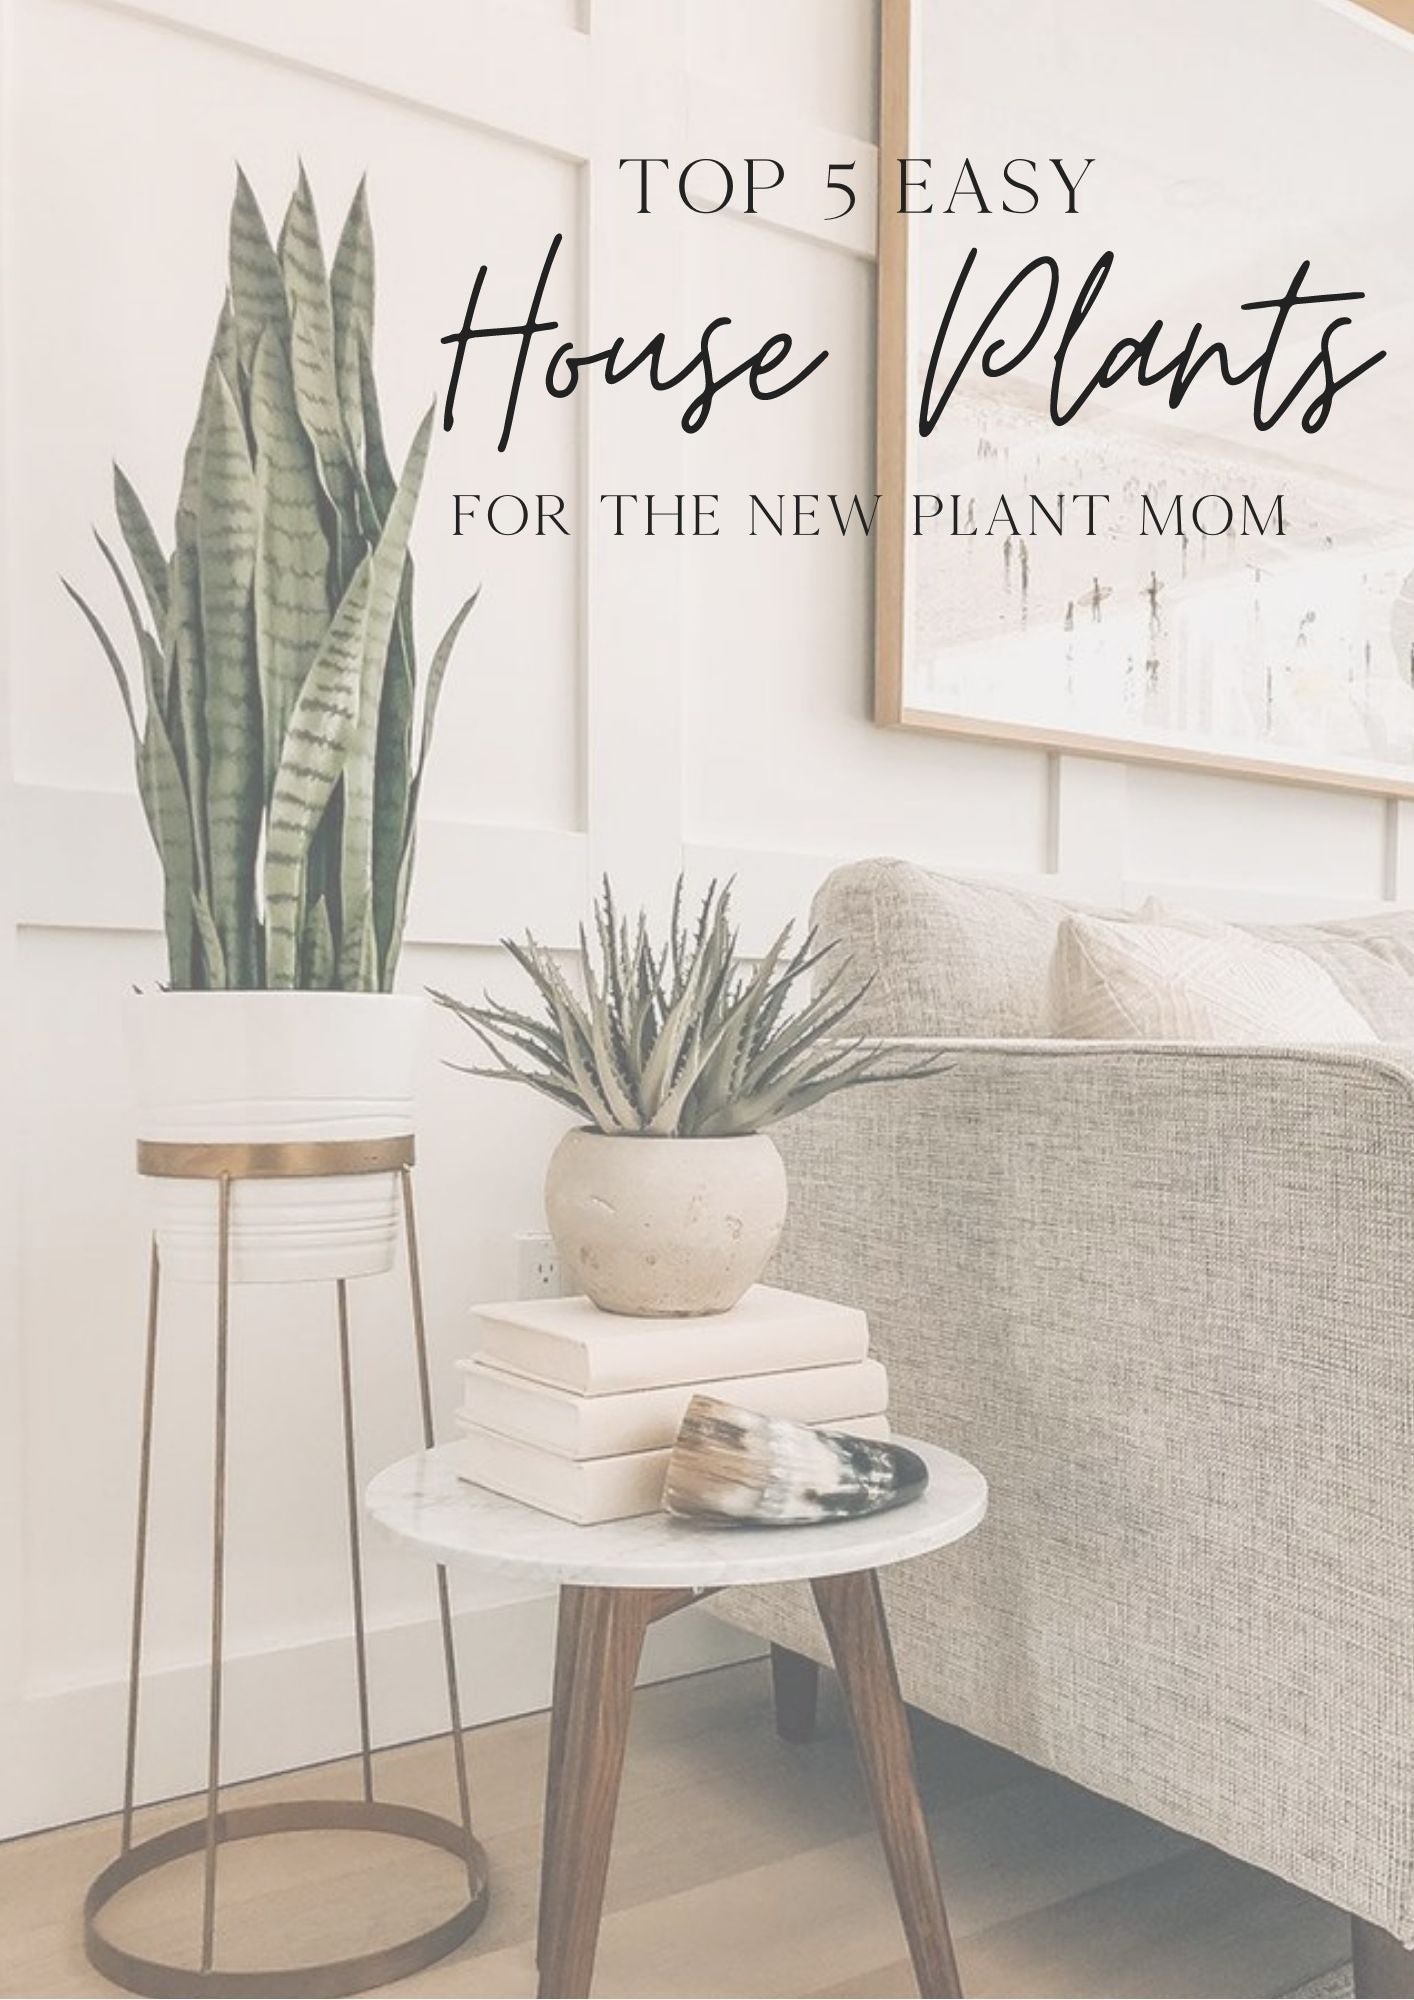 Top 5 Easy House Plants for a New Plant Mom